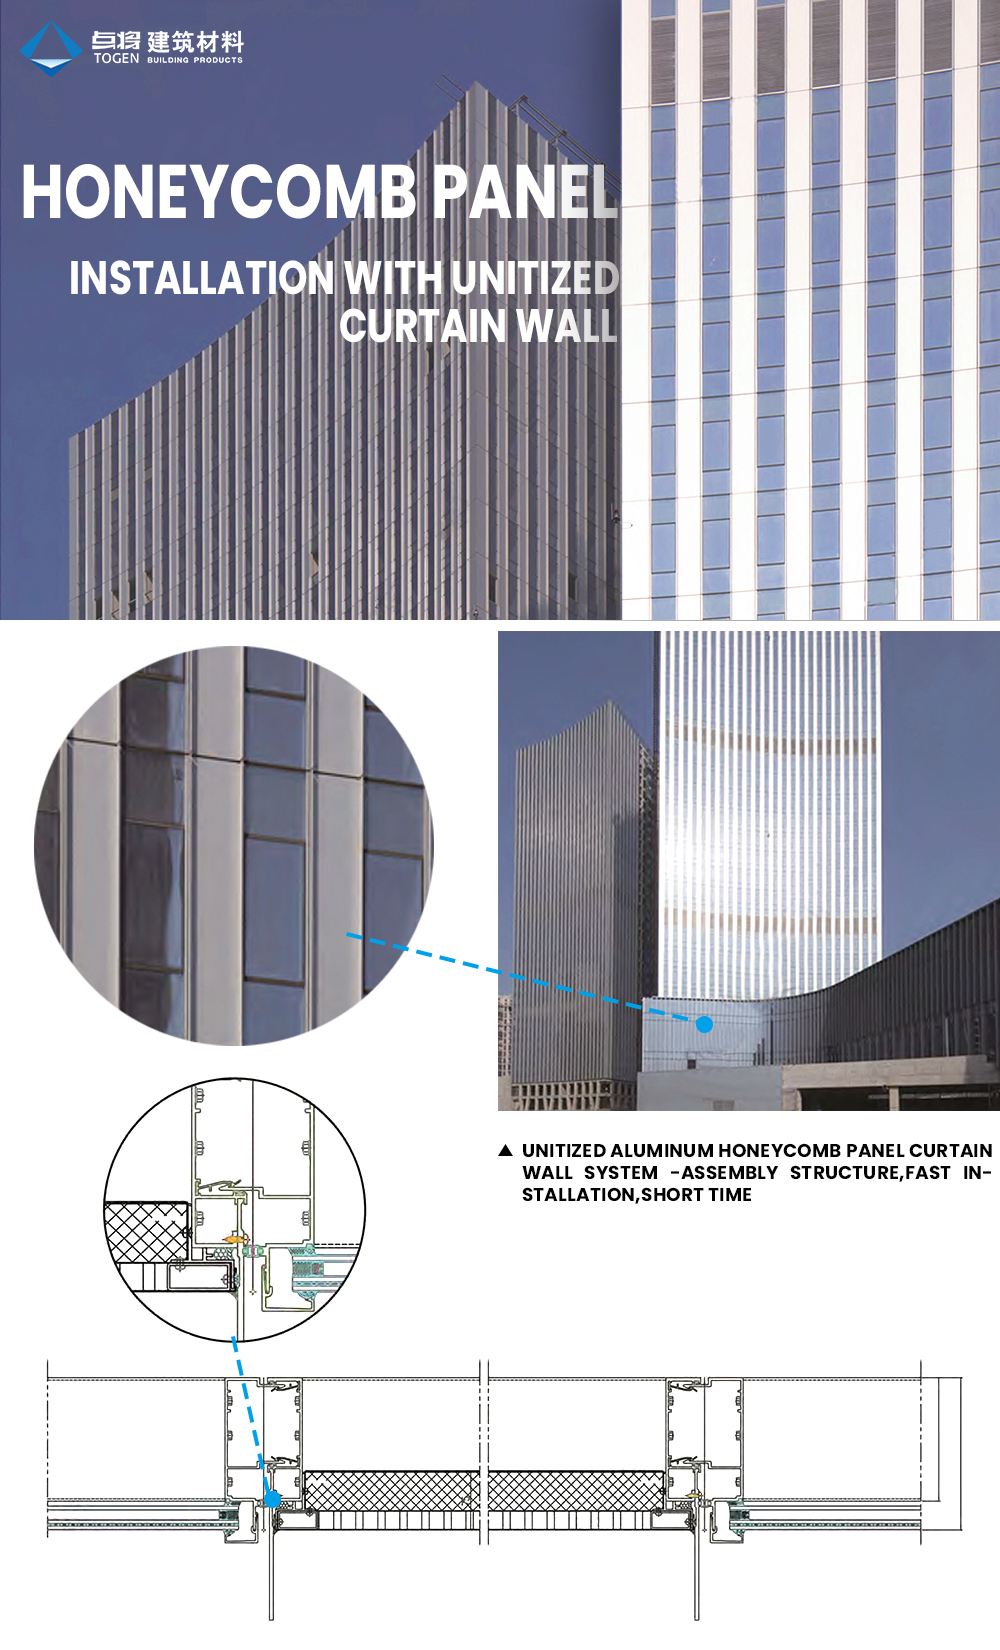 Honeycomb Panel installation with Unitized Curtain Wall